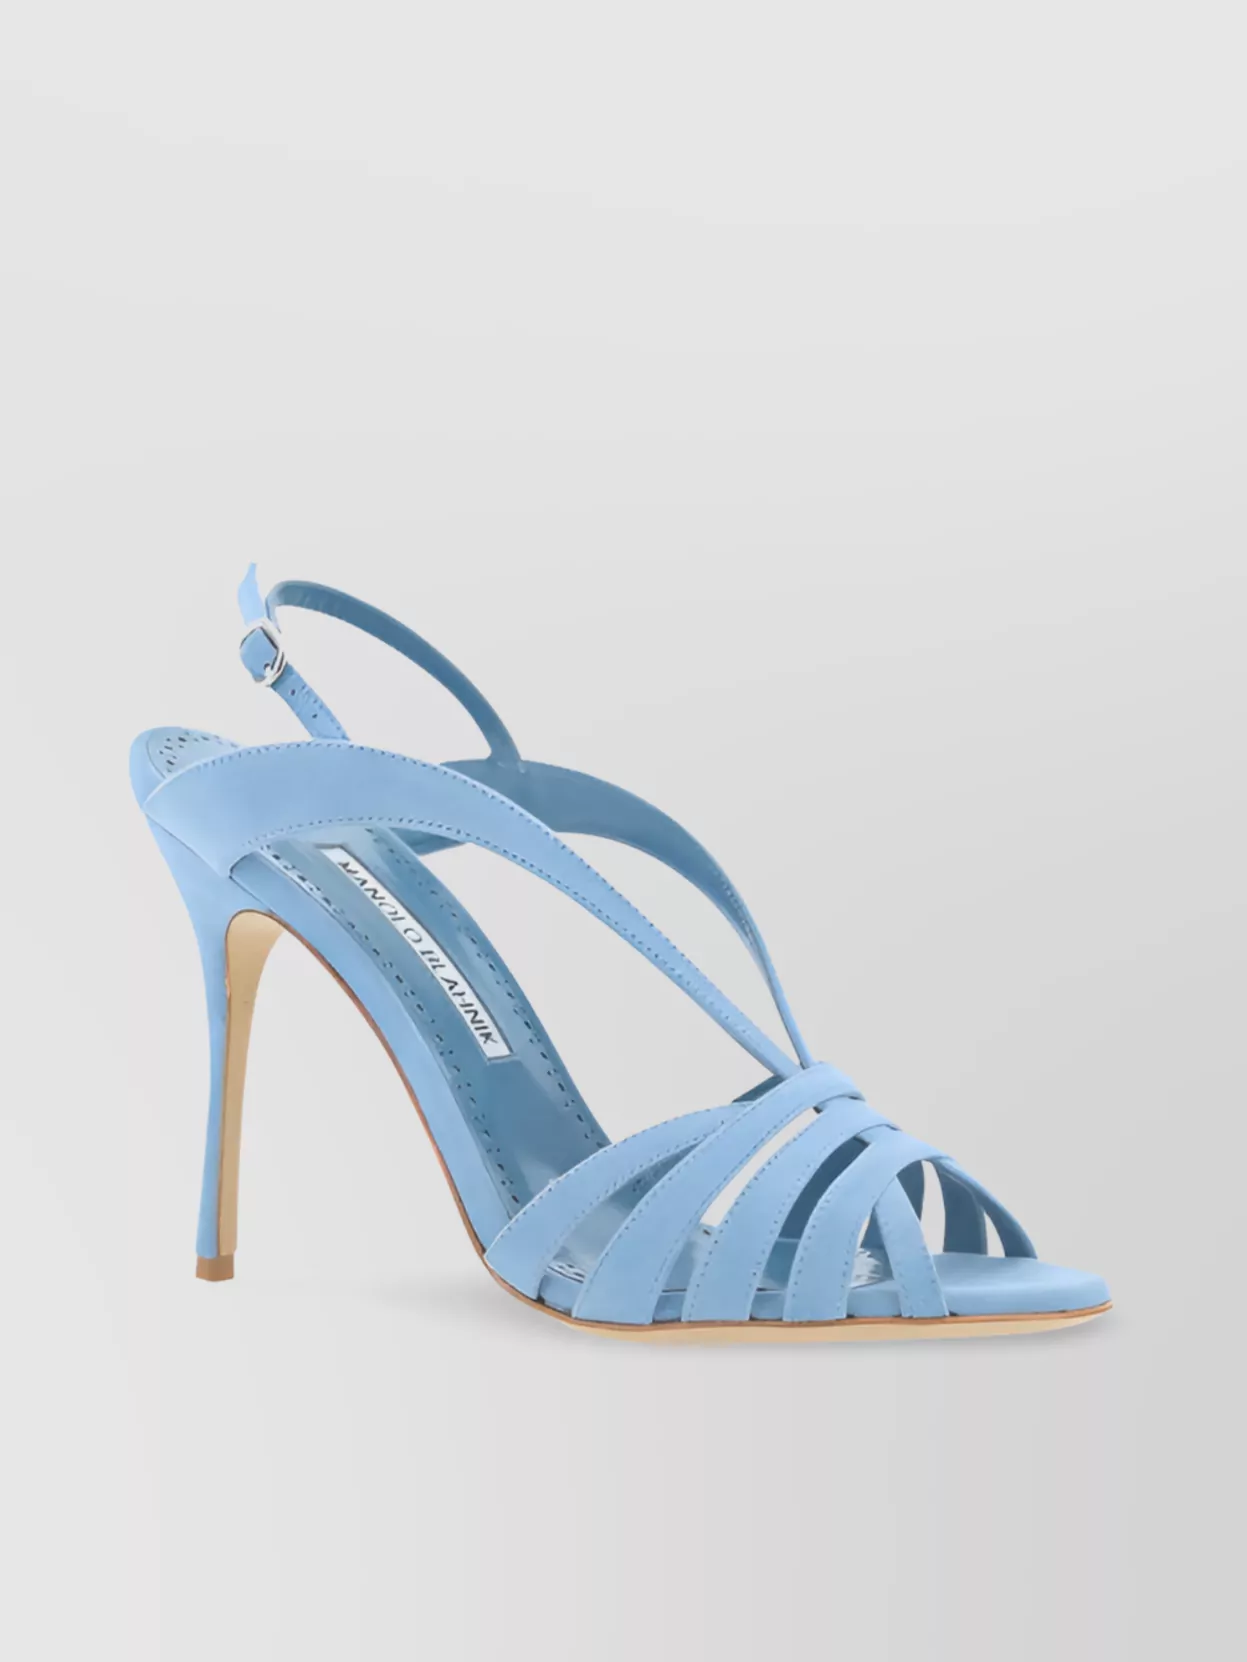 Shop Manolo Blahnik Suede Caged Stiletto Sandals With Almond Toe